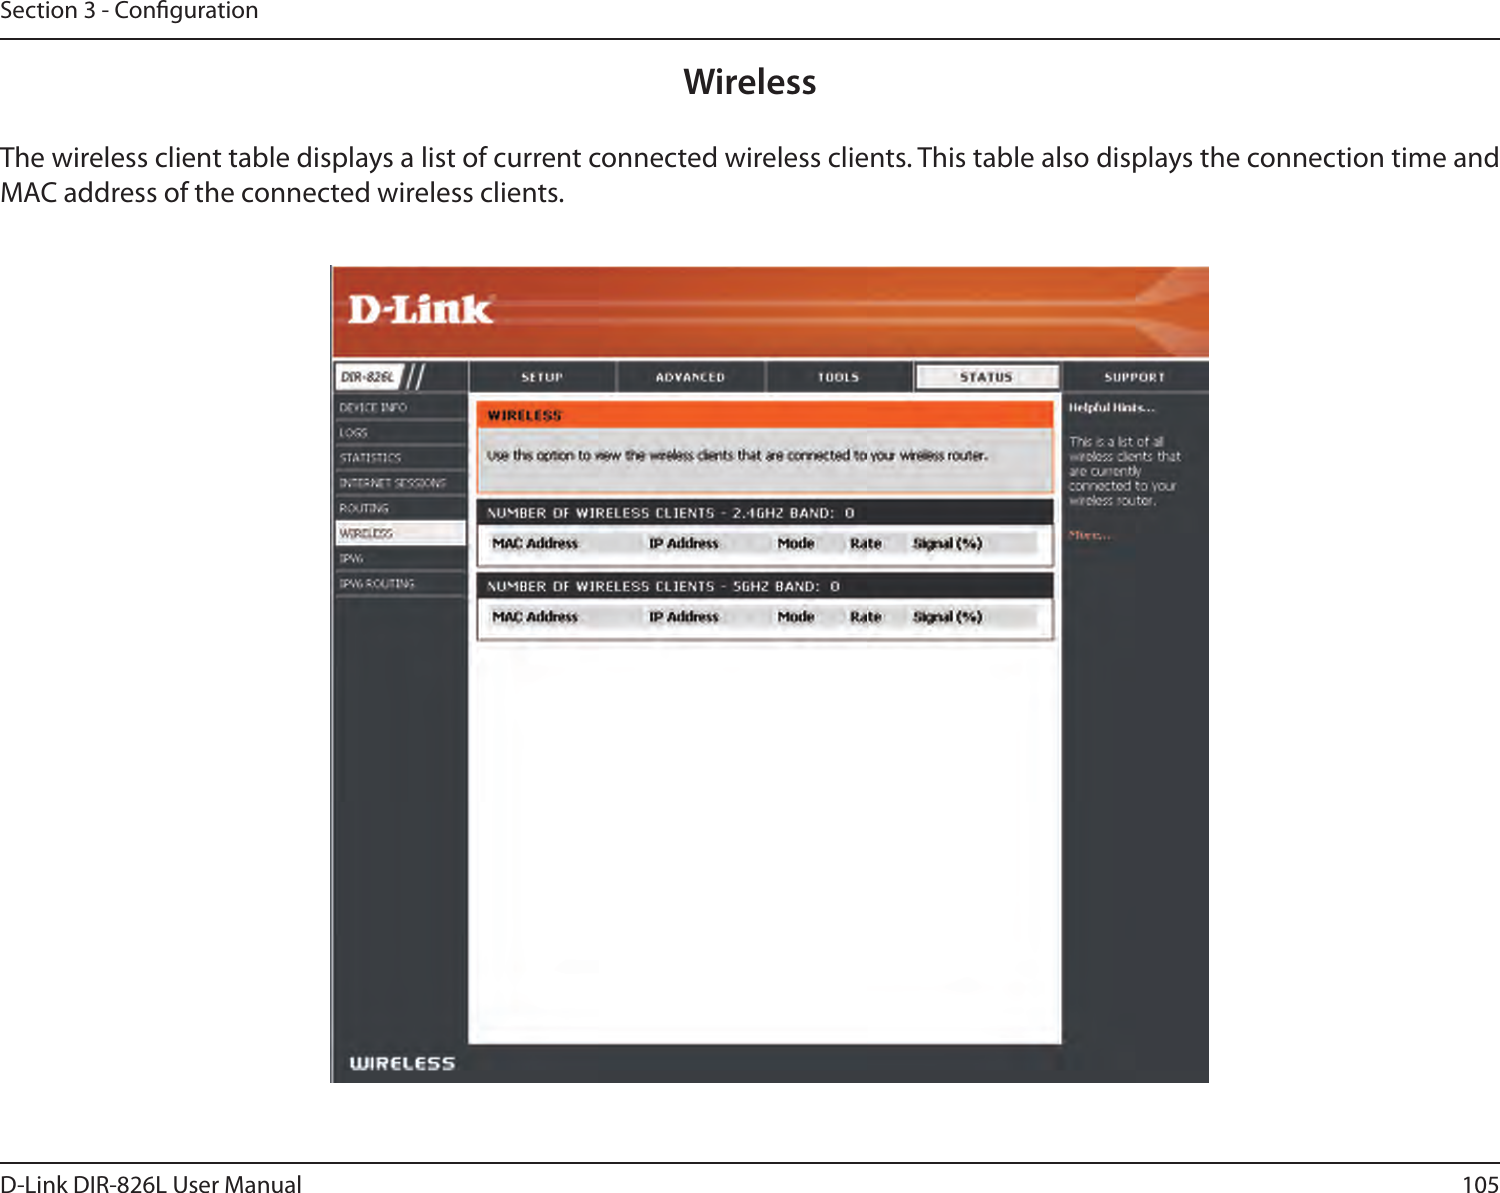 105D-Link DIR-826L User ManualSection 3 - CongurationThe wireless client table displays a list of current connected wireless clients. This table also displays the connection time and MAC address of the connected wireless clients.Wireless